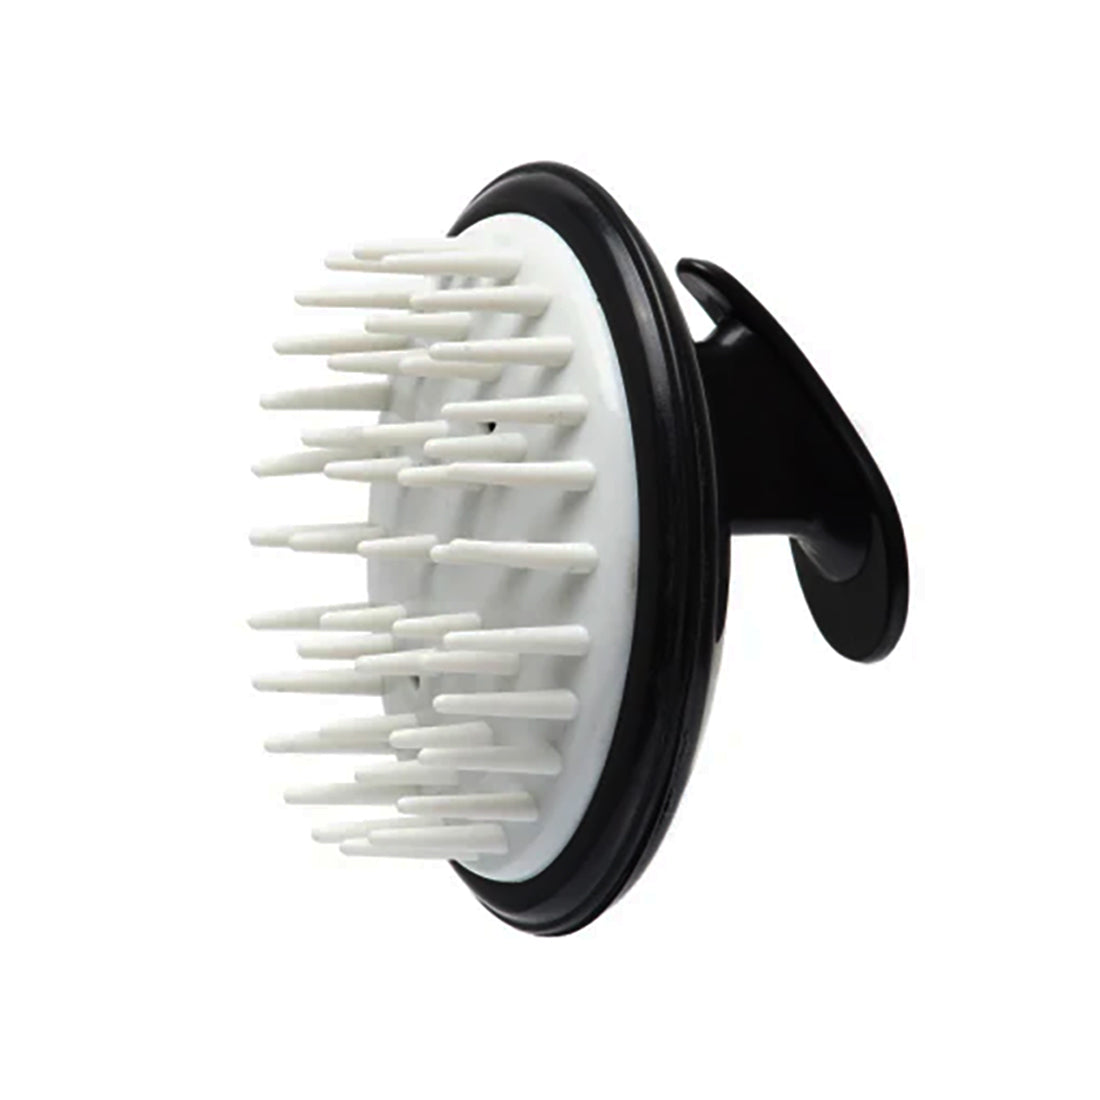 The Shave Factory Massage Comb